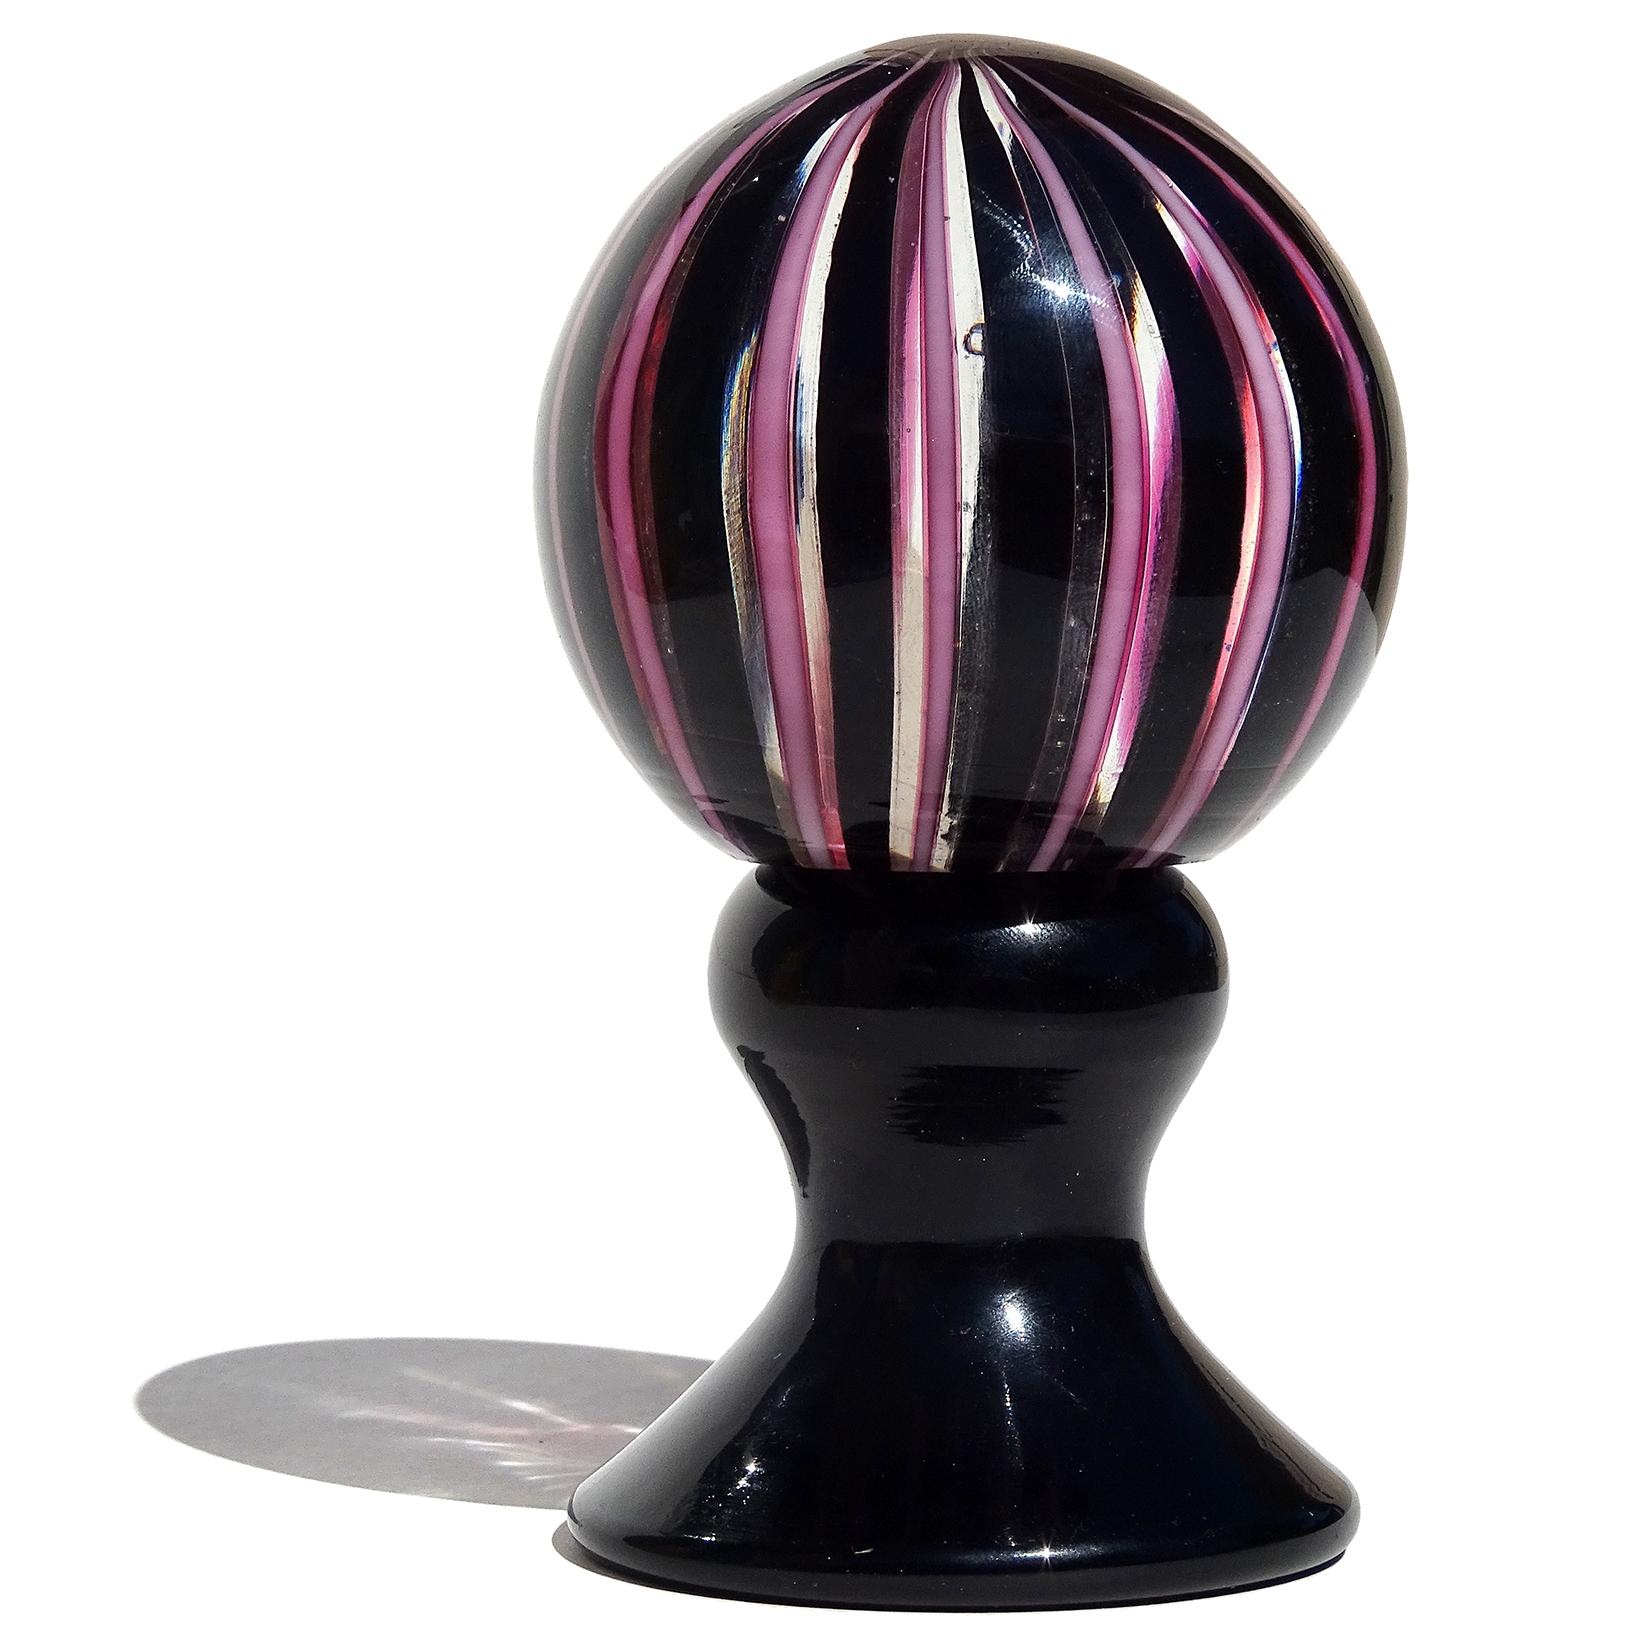 Gorgeous vintage Murano hand blown pink and black Filigrana ribbons Italian art glass pedestal paperweight. Created in the same style and color combination as Venini pieces by Bianconi and Paolo Venini. The paperweight has an original 